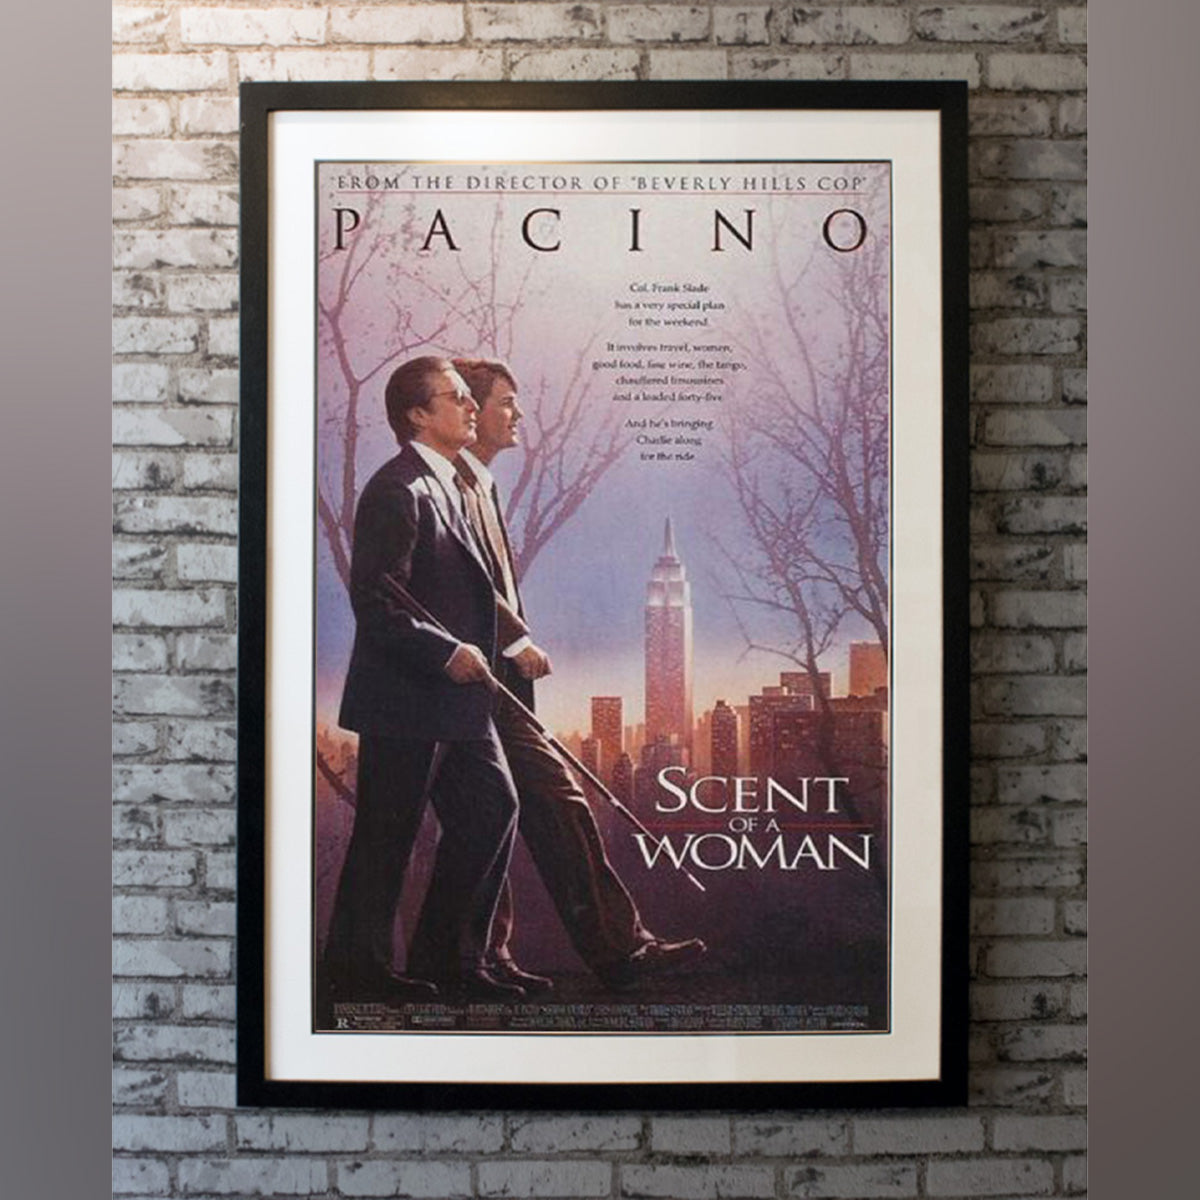 Original Movie Poster of Scent Of A Woman (1992)